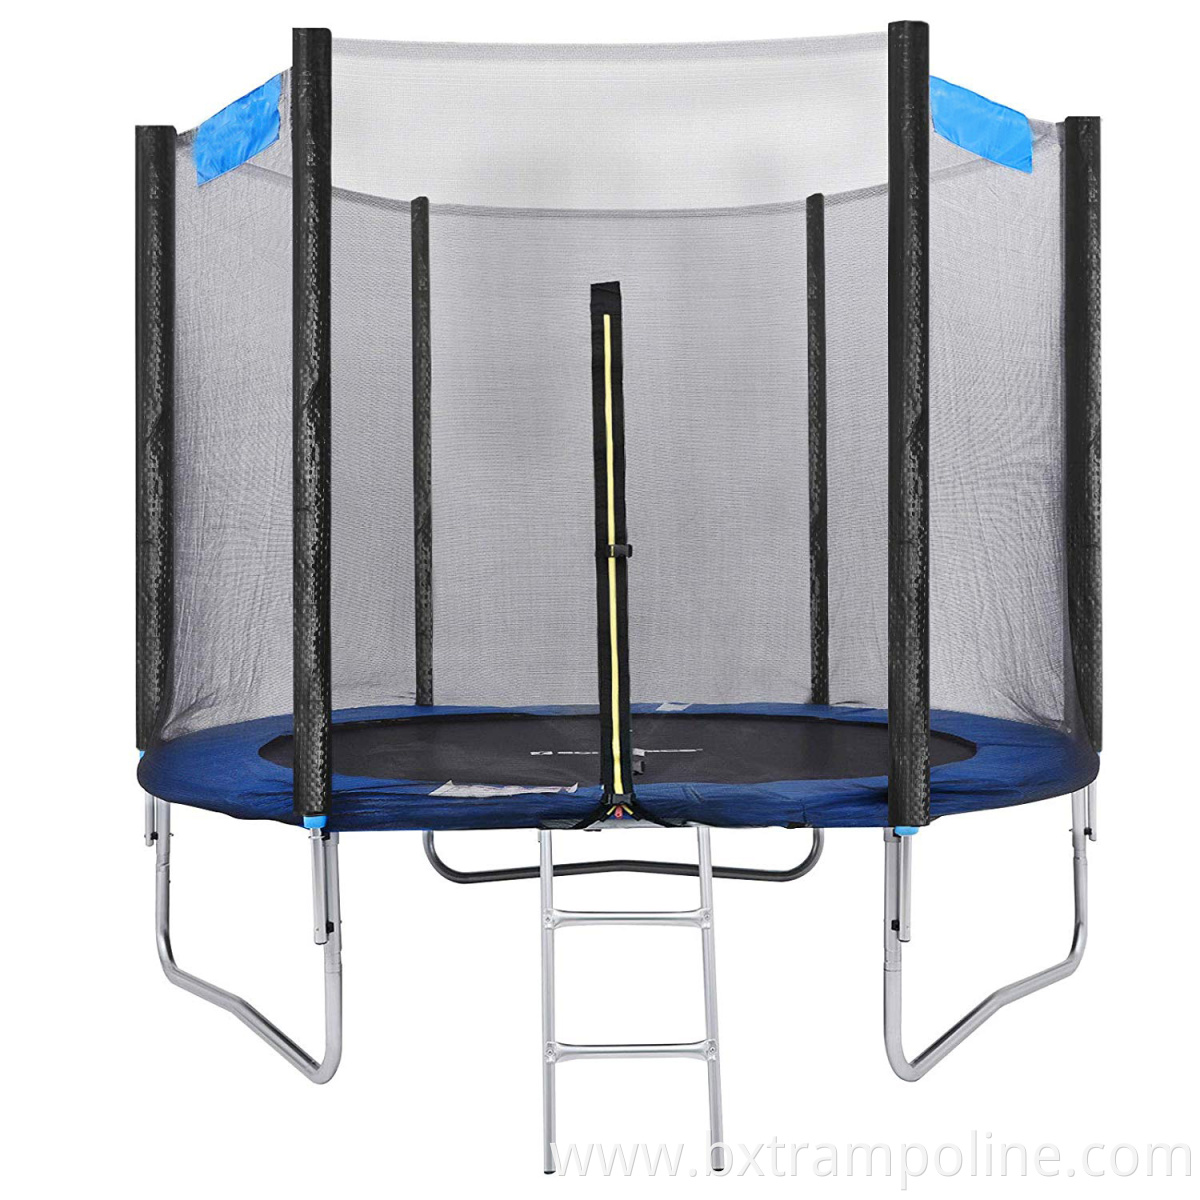 Garden Trampoline, TUV GS Tested Weld-free Frame Construction, Removable Safety Net, includes Edge Cover